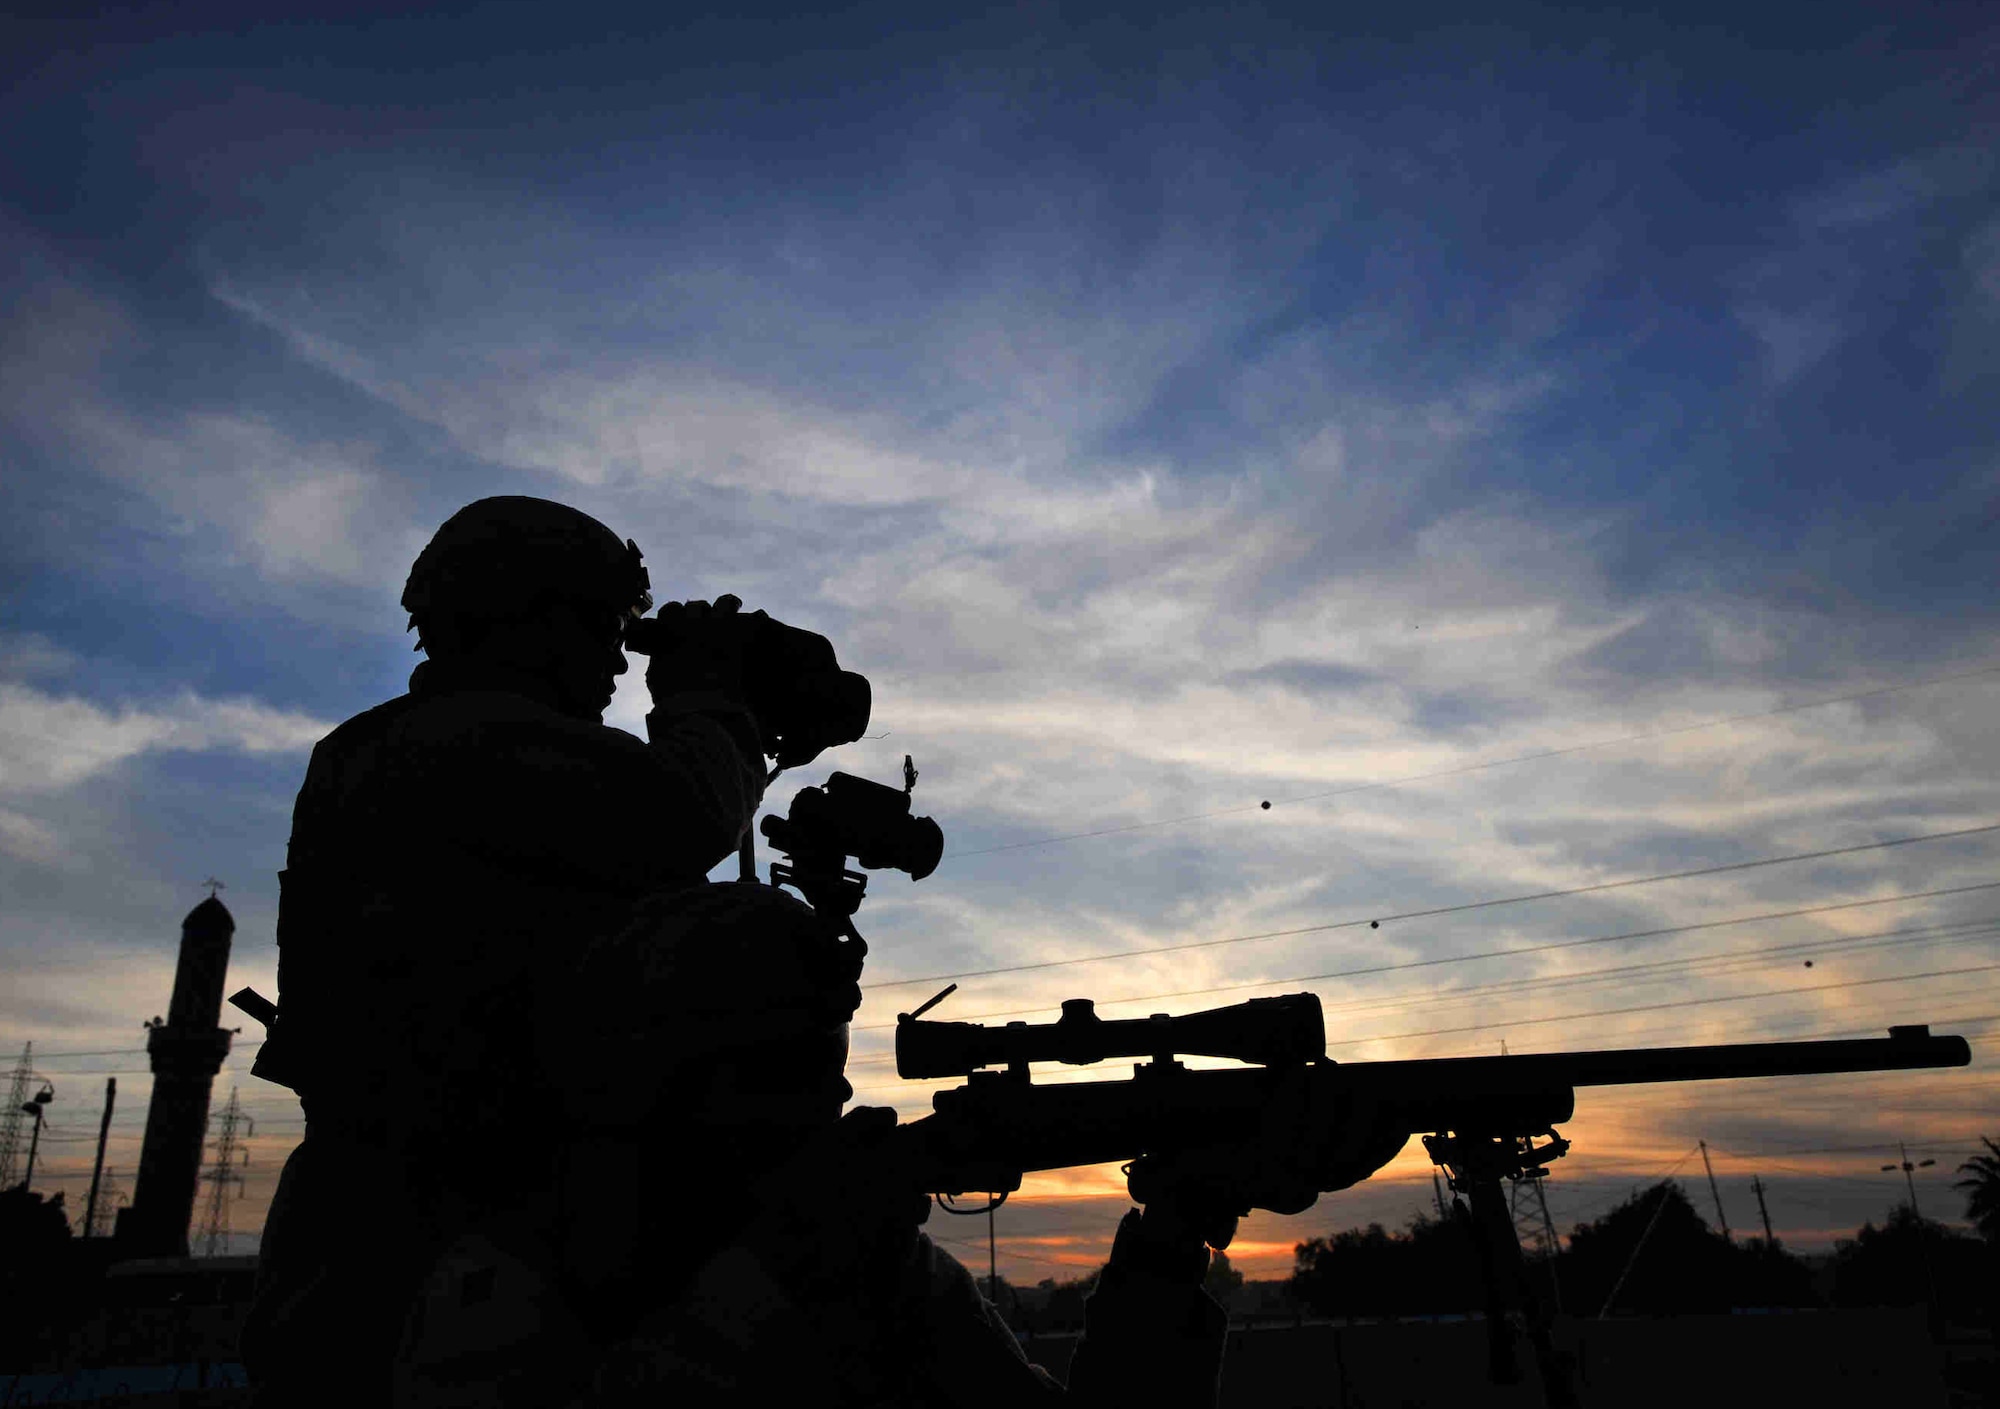 Airmen sharpshooters scan the horizon for possible threats December 2008 in the Al Doura community of southern Baghdad, Iraq. The Airmen are assigned to a close precision engagement team with the 732nd Expeditionary Security Forces Squadron with the 716th Military Police Battalion. (U.S. Navy photo/Petty Officer 2nd Class Todd Frantom)